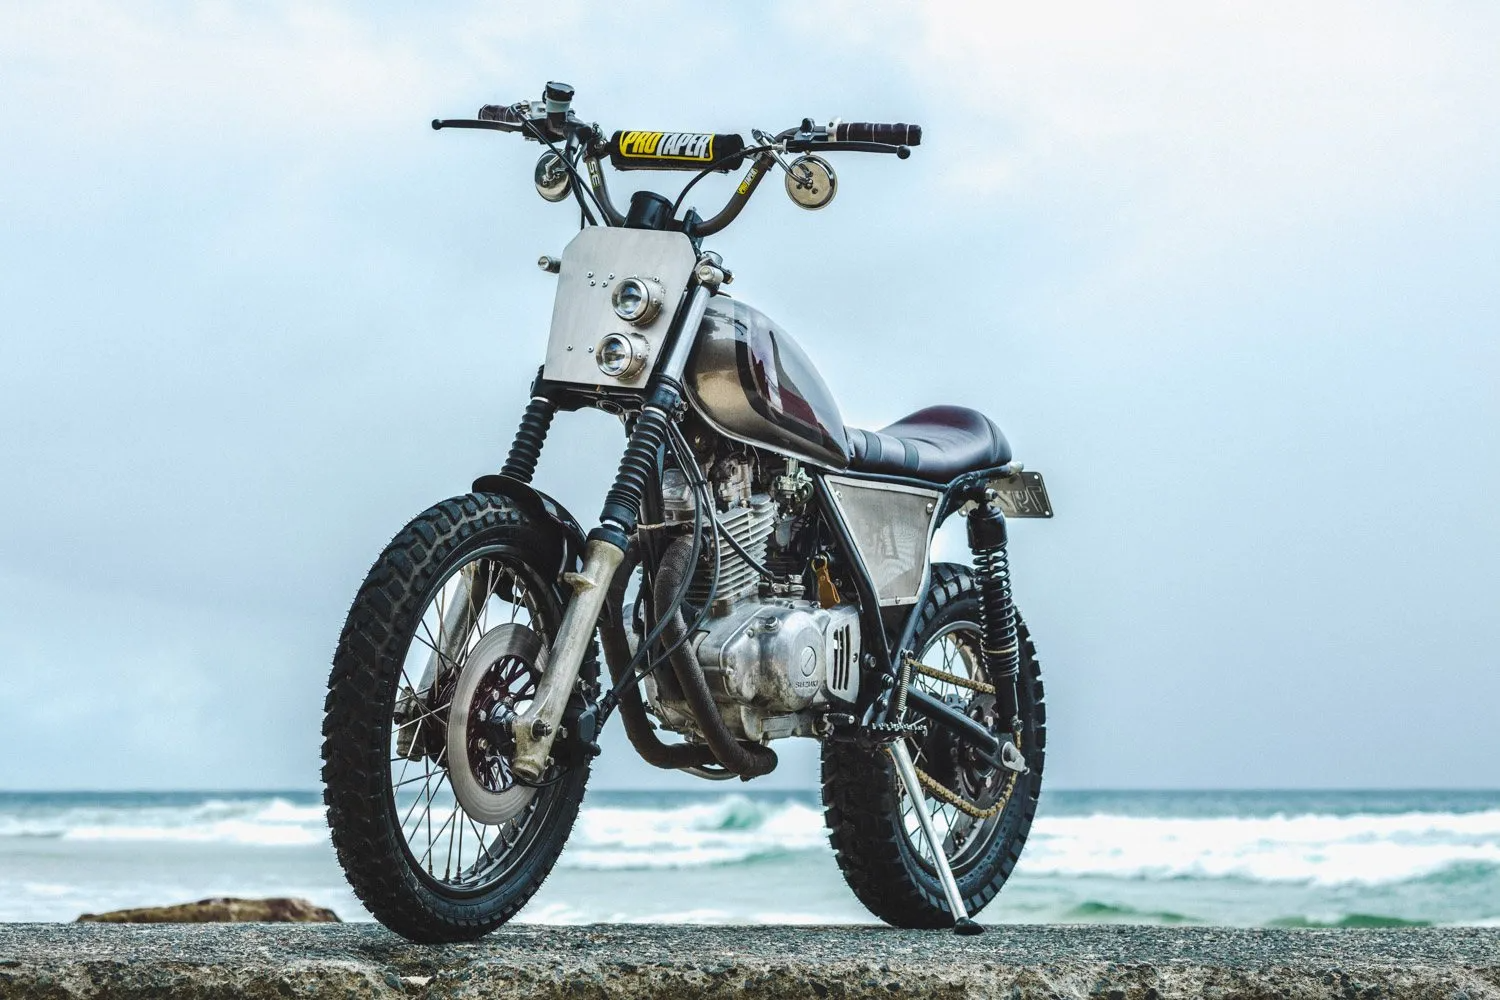 Nicks GN250 Scrambler 3- Completing your project bike and getting it on the road